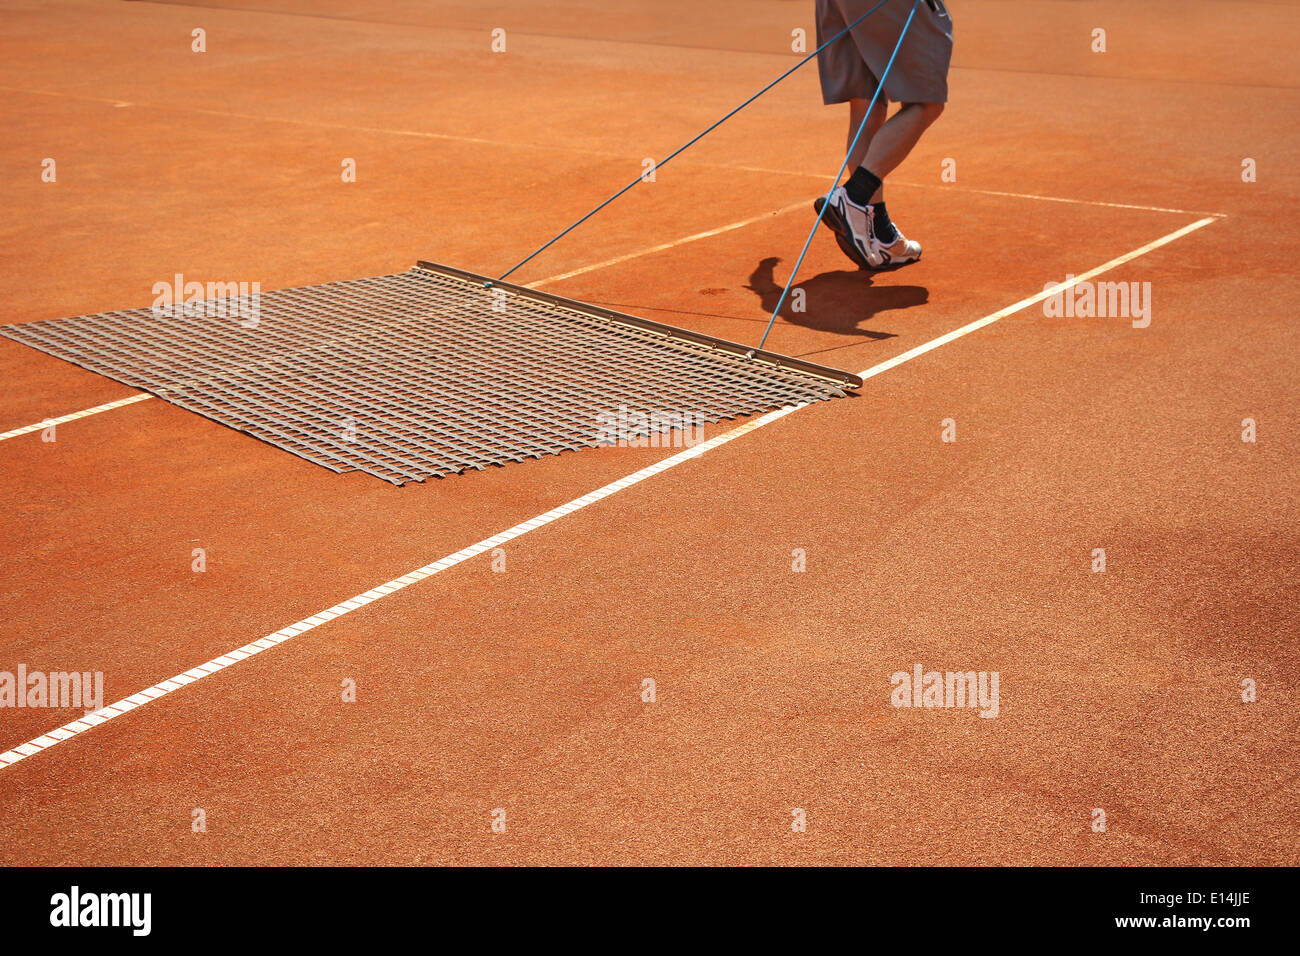 Aligning surface tennis court, with pulling network Stock Photo